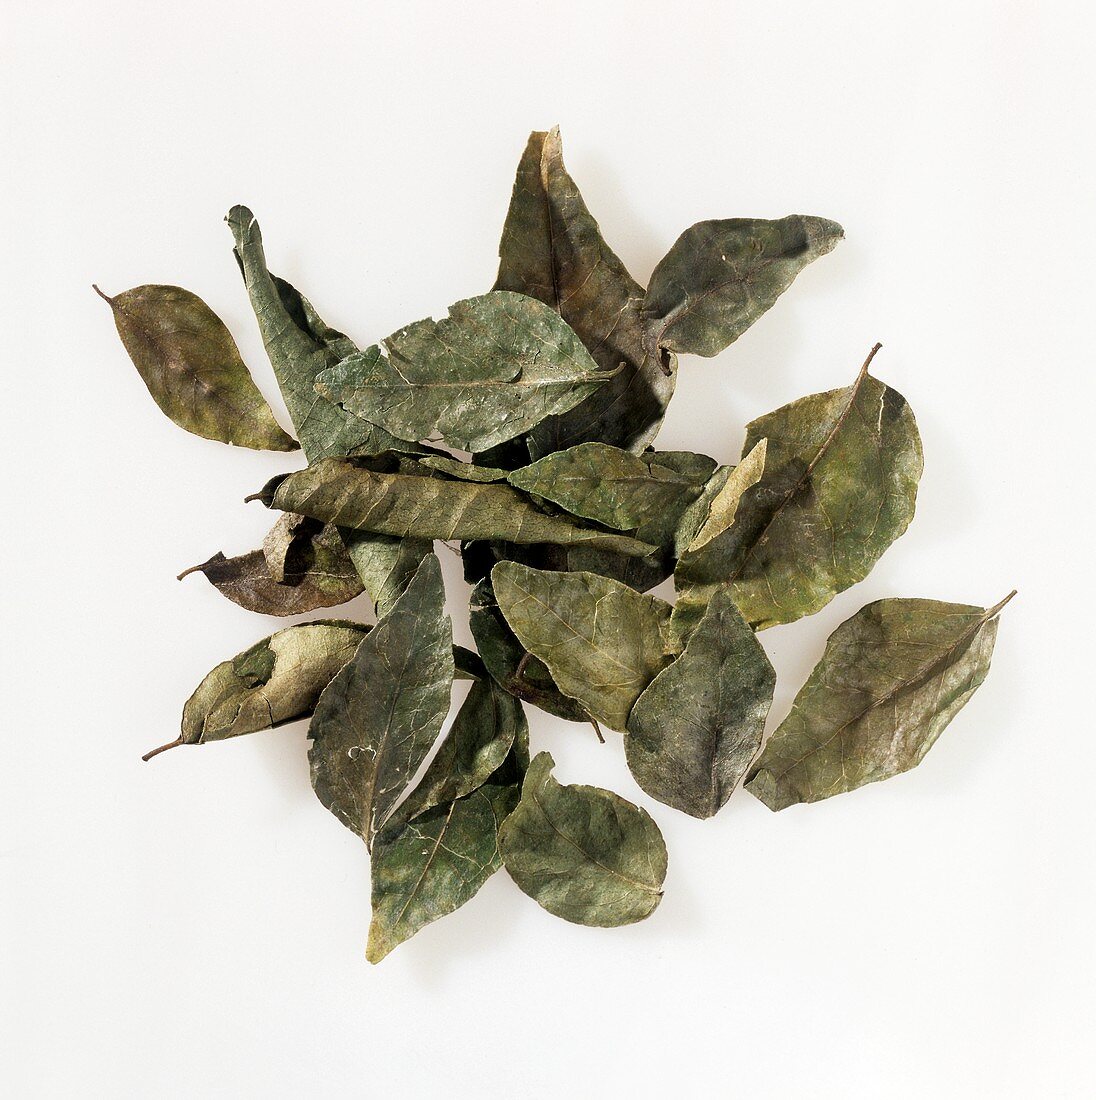 Dried curry leaves on a white background